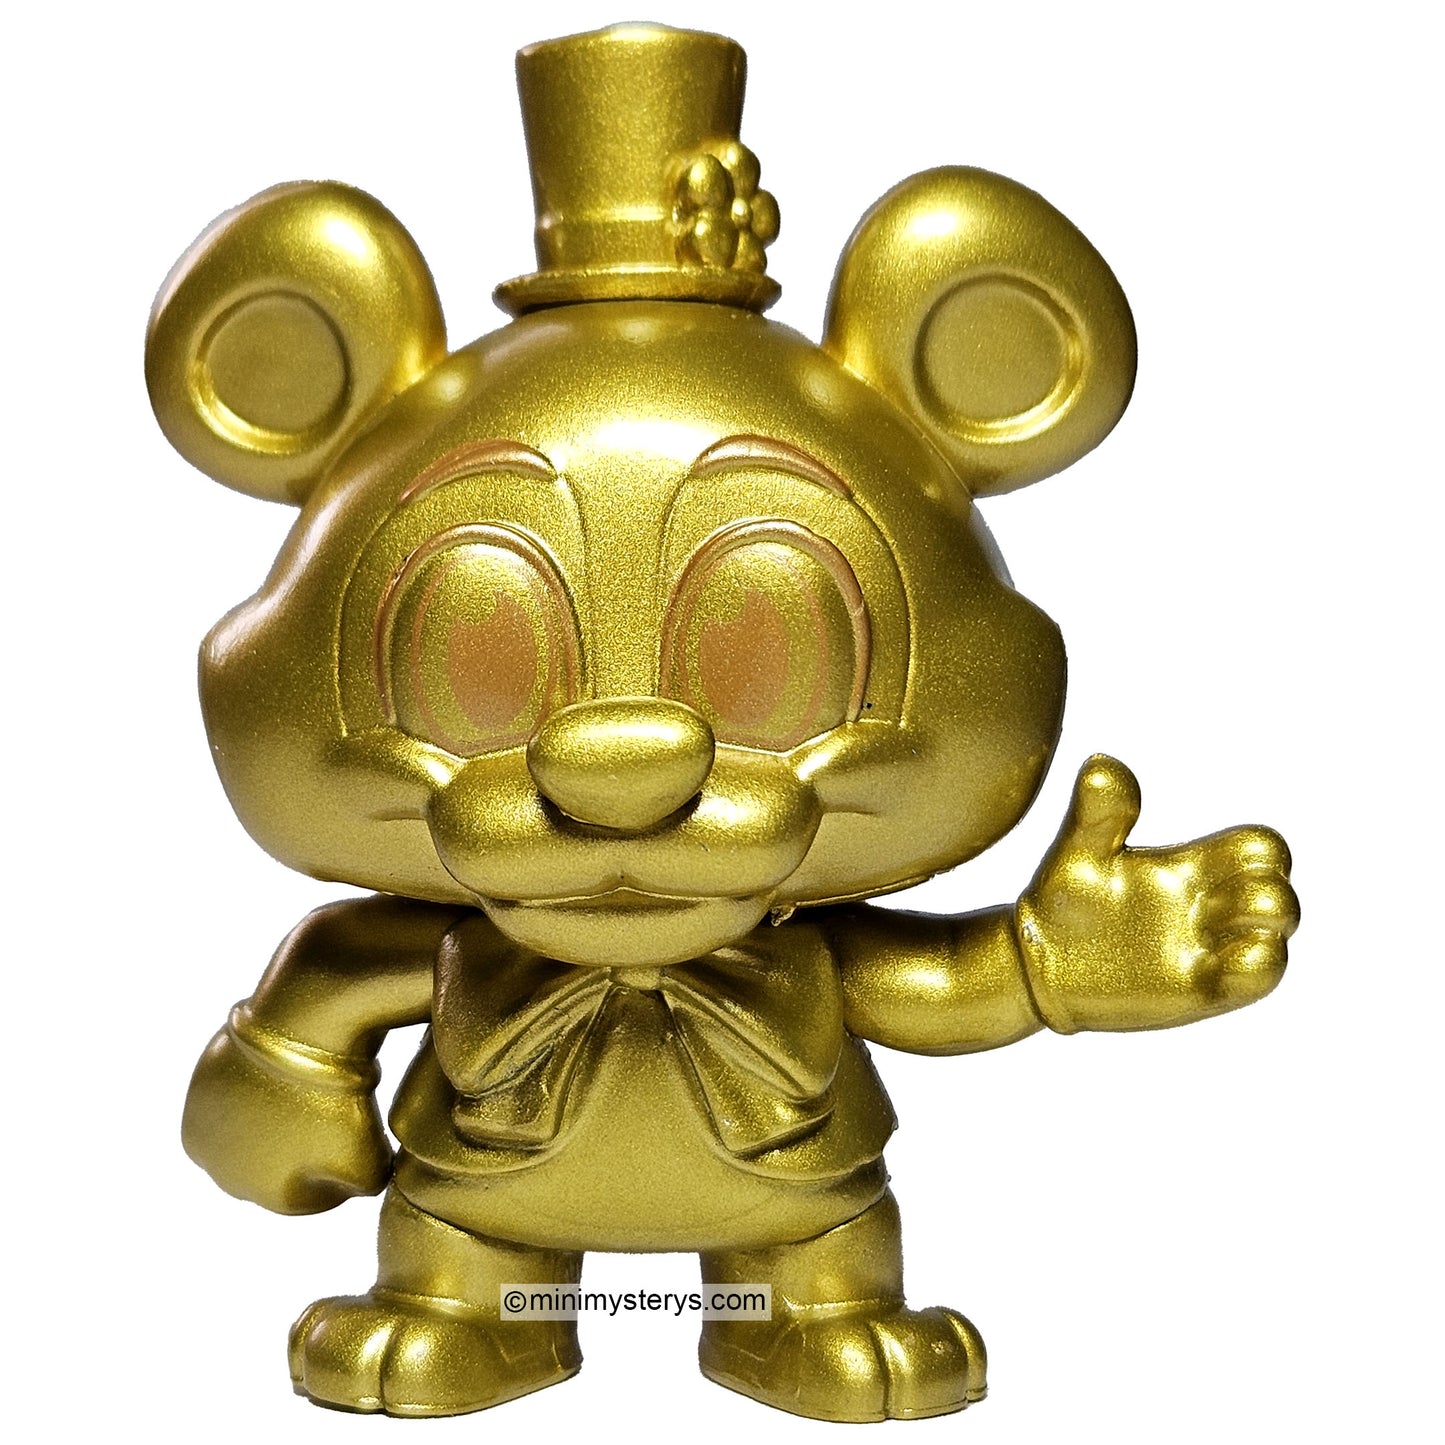 Five Nights at Freddy’s Balloon Circus Funko Mystery Minis - Choose Yours